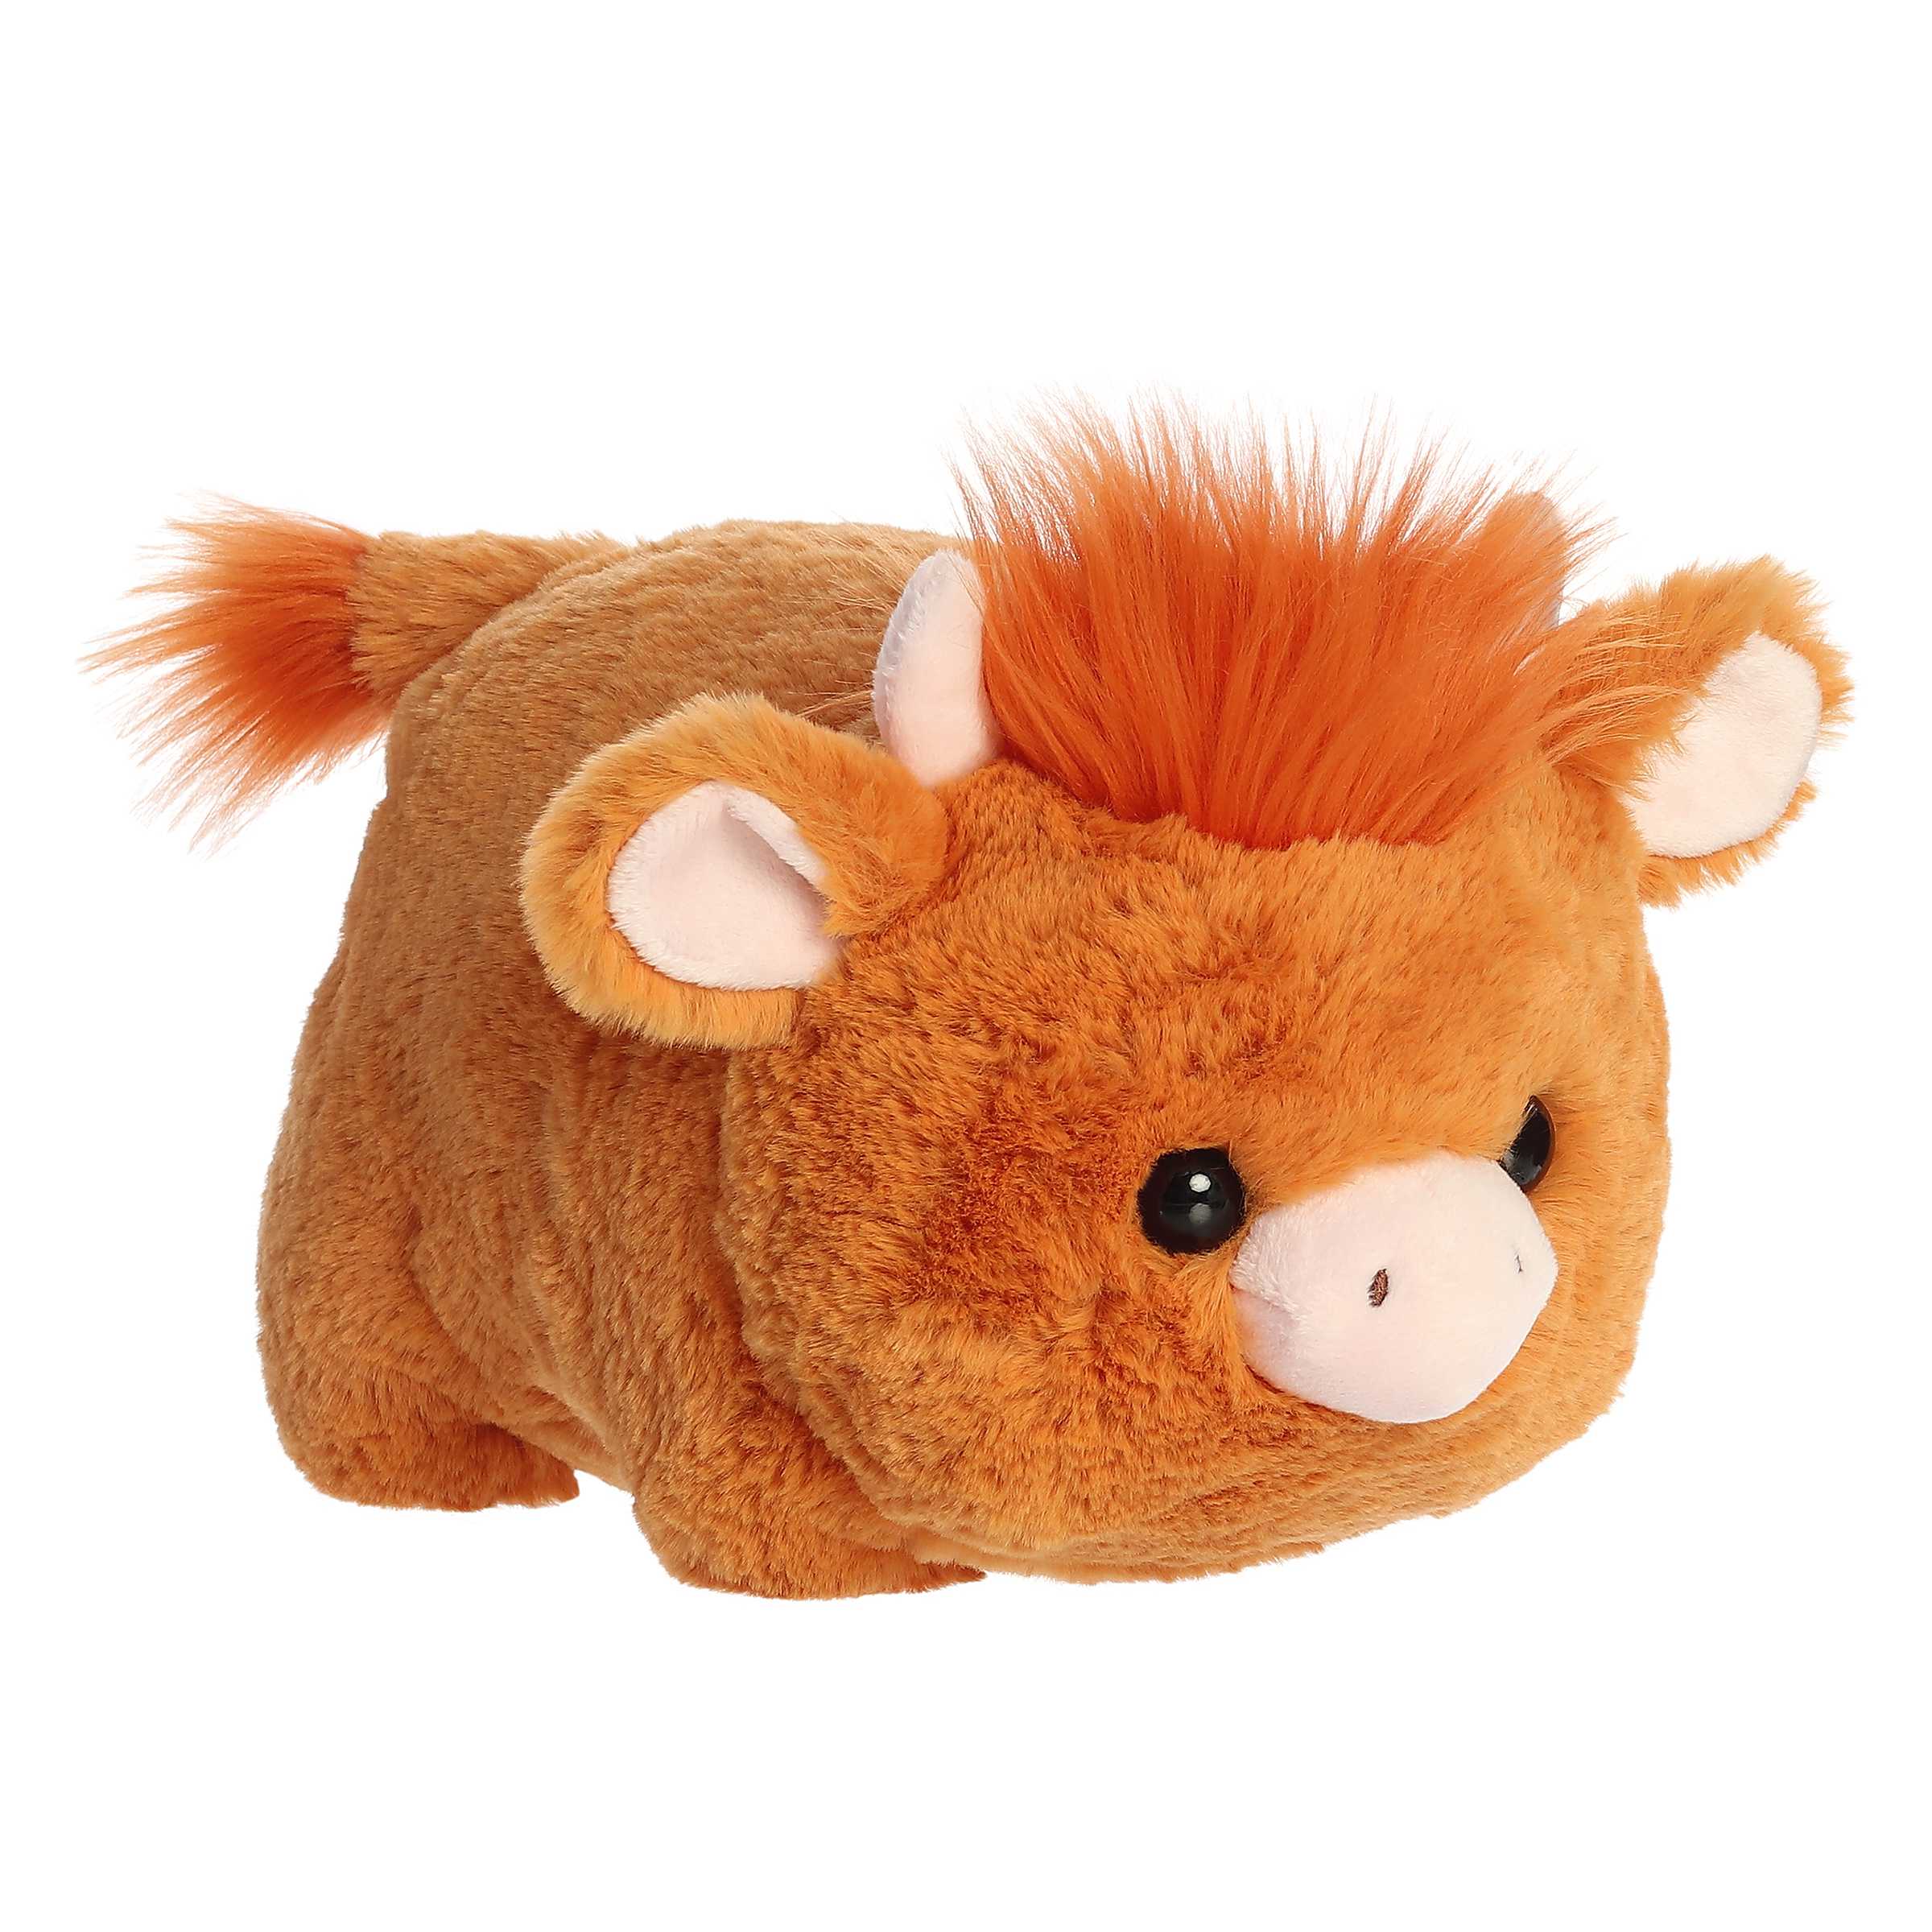 Hamish Highland Cow from Spudsters, with a potato body and fluffy mane, capturing the spirit of the Highlands